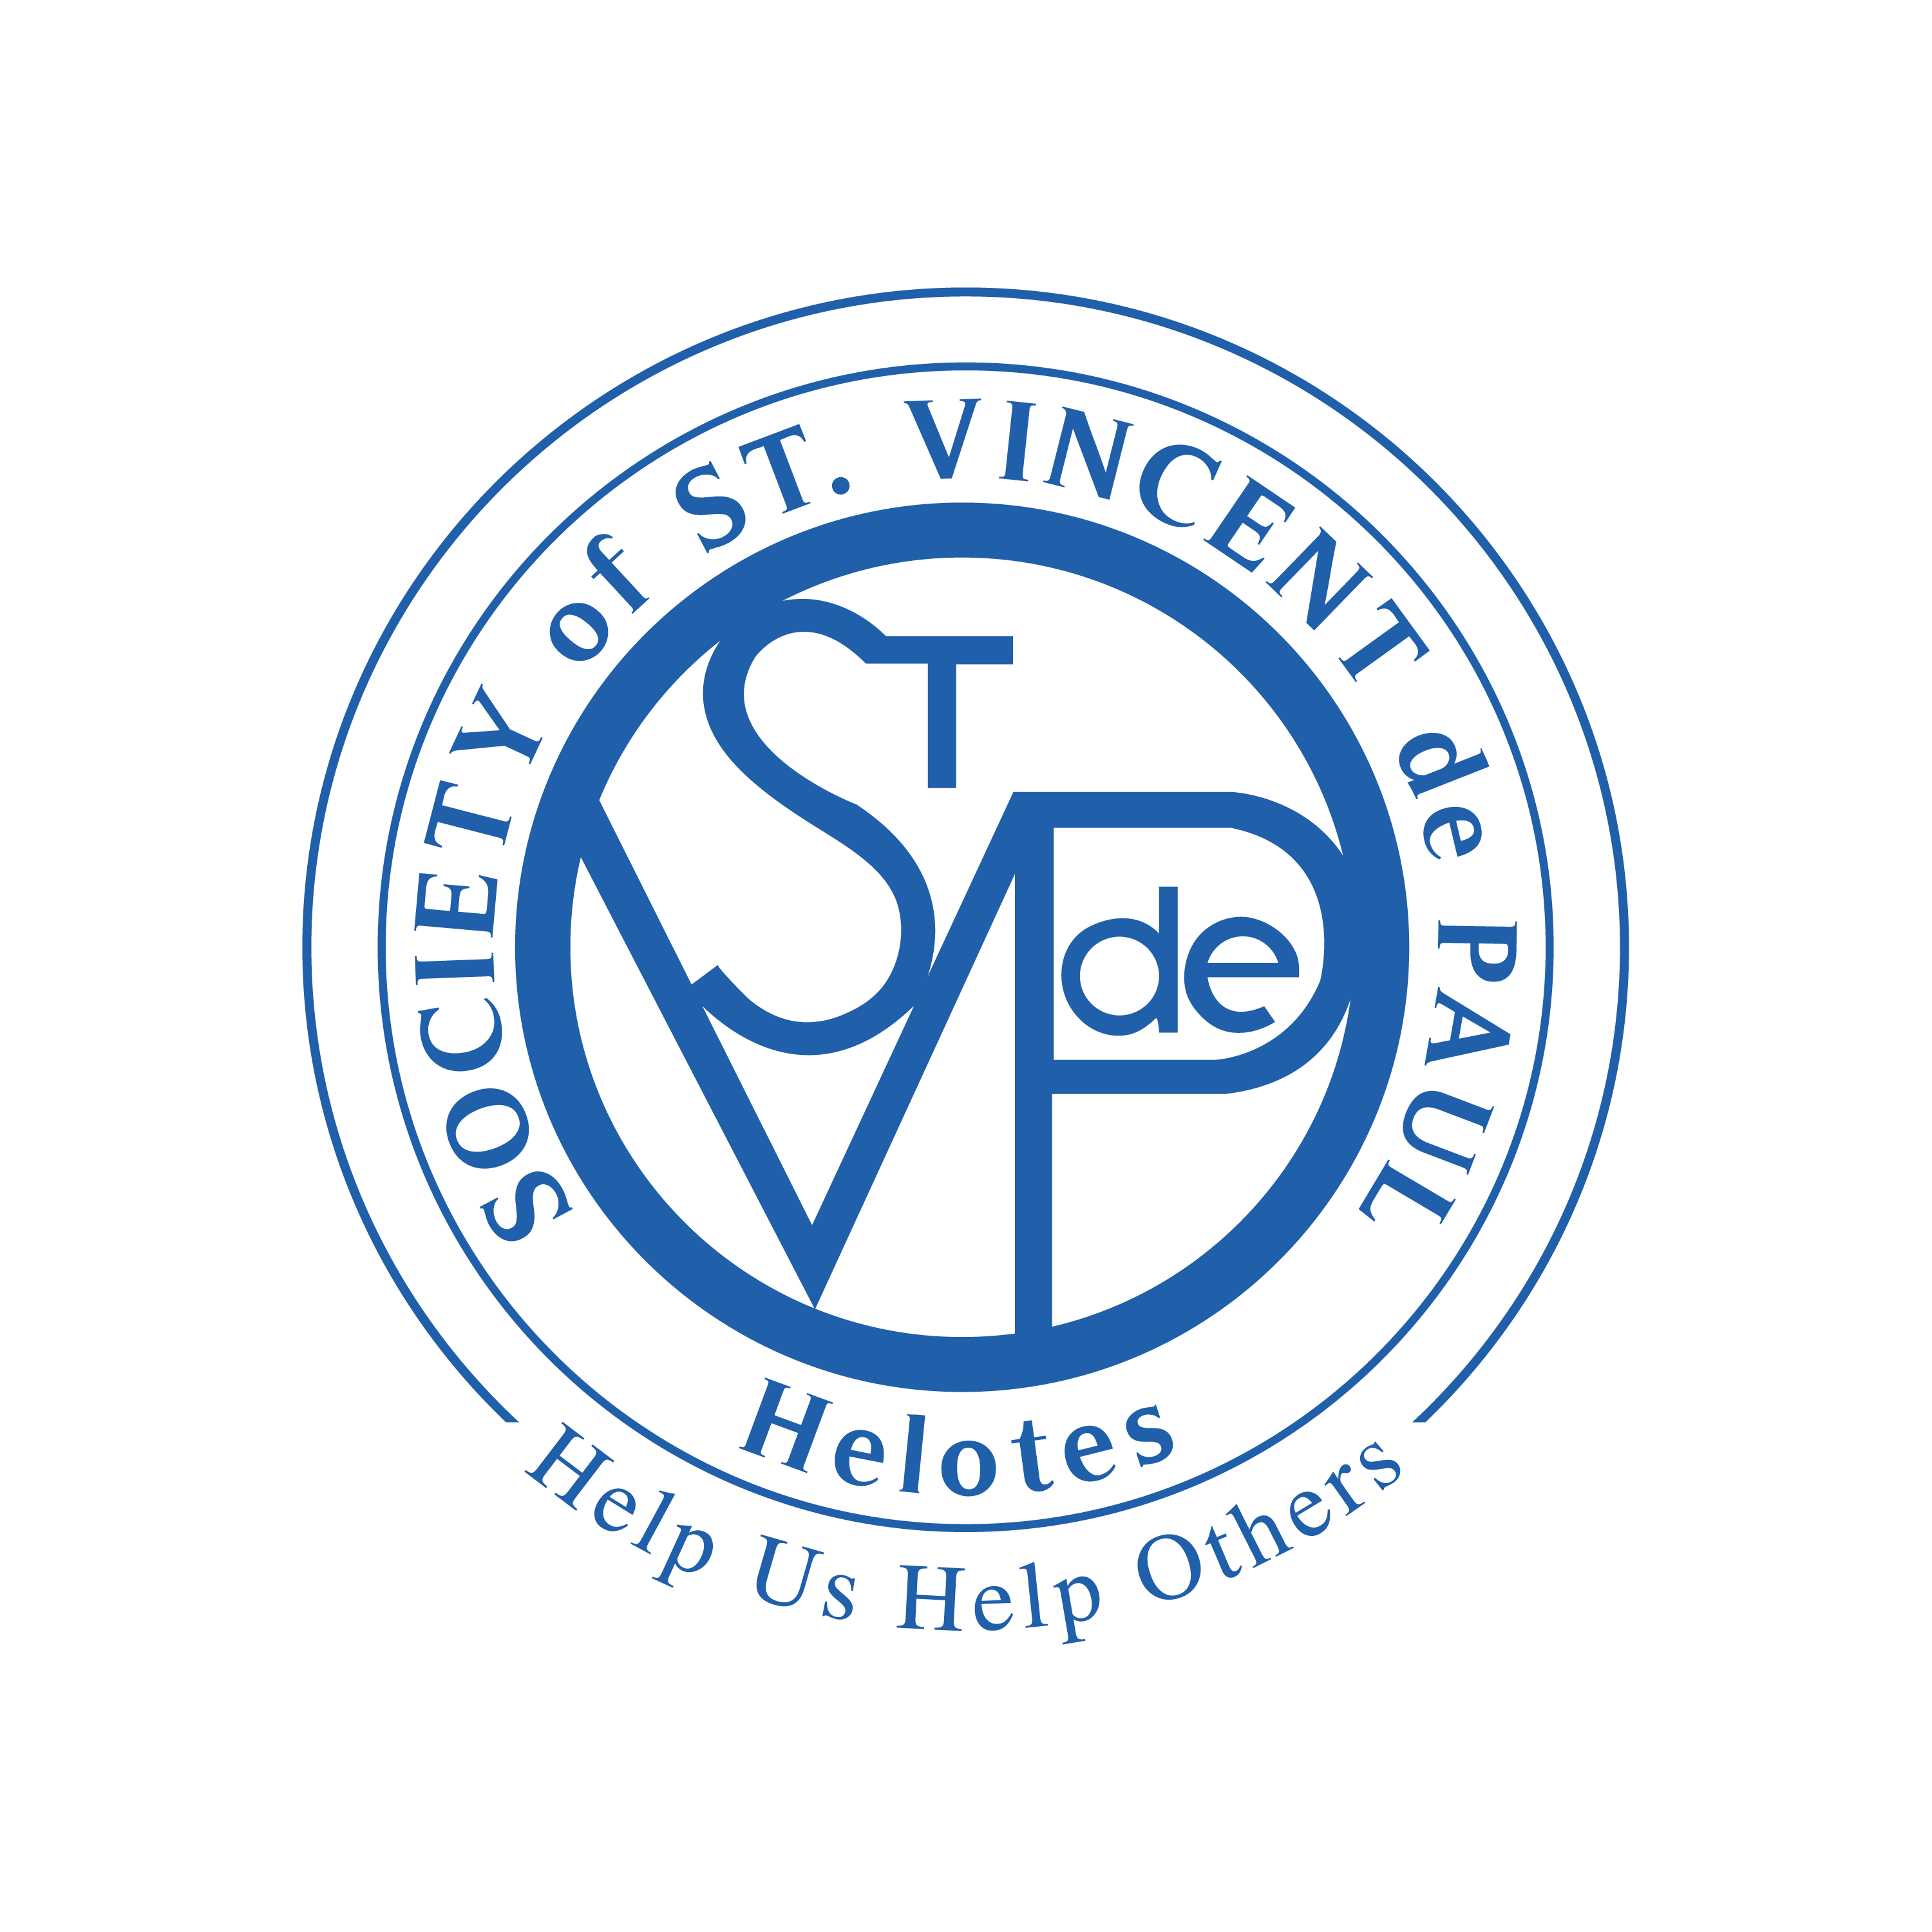 Society of St. Vincent de Paul of Helotes